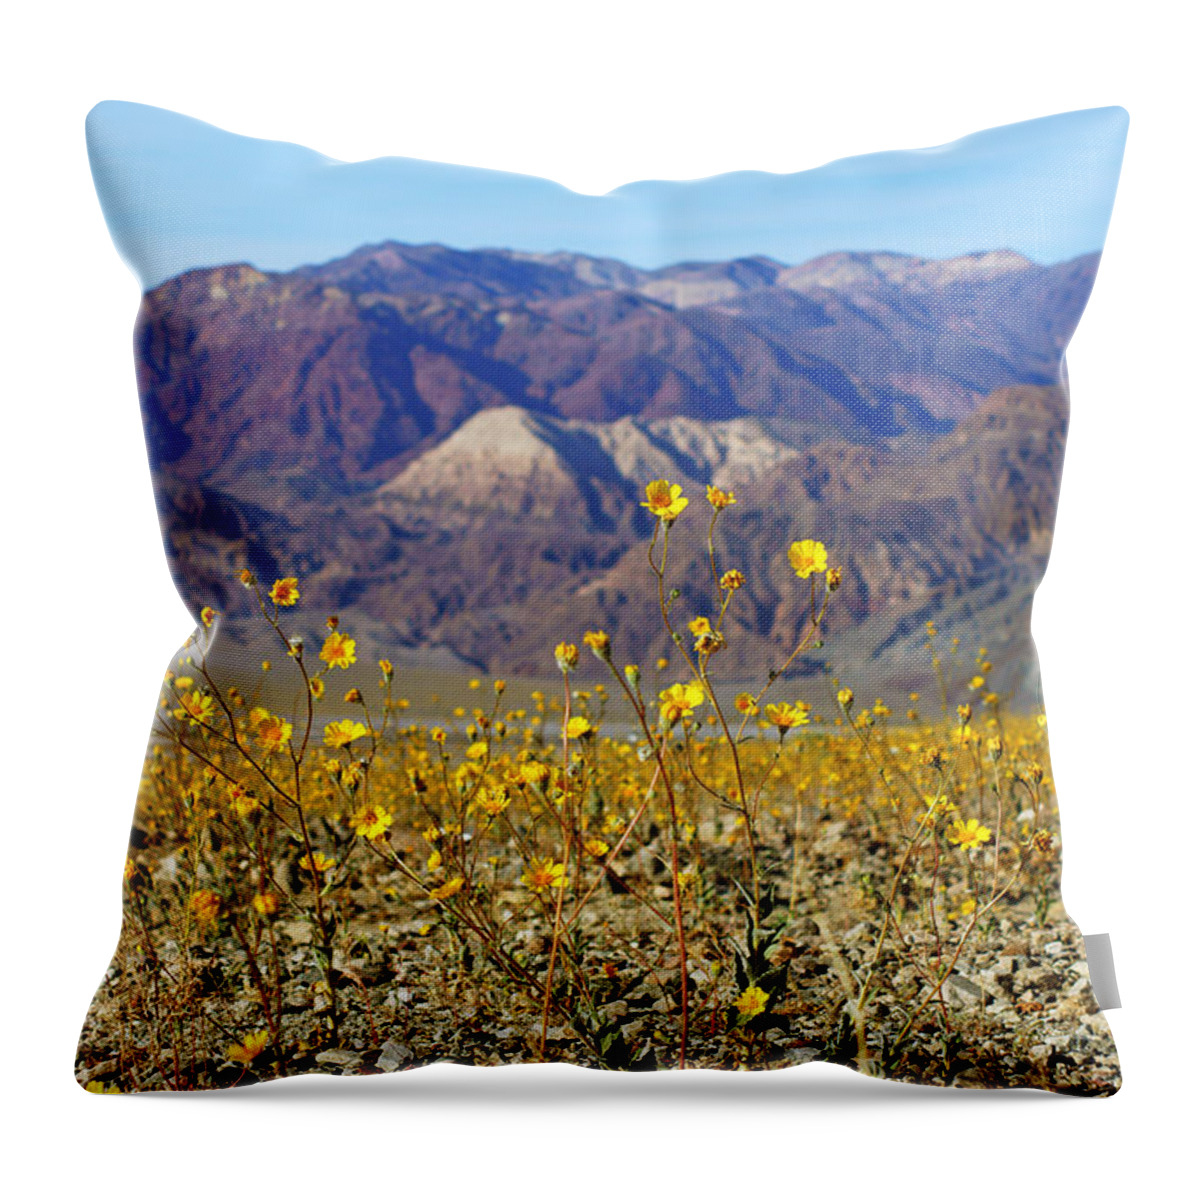 Superbloom 2016 Throw Pillow featuring the photograph Death Valley Superbloom 405 by Daniel Woodrum